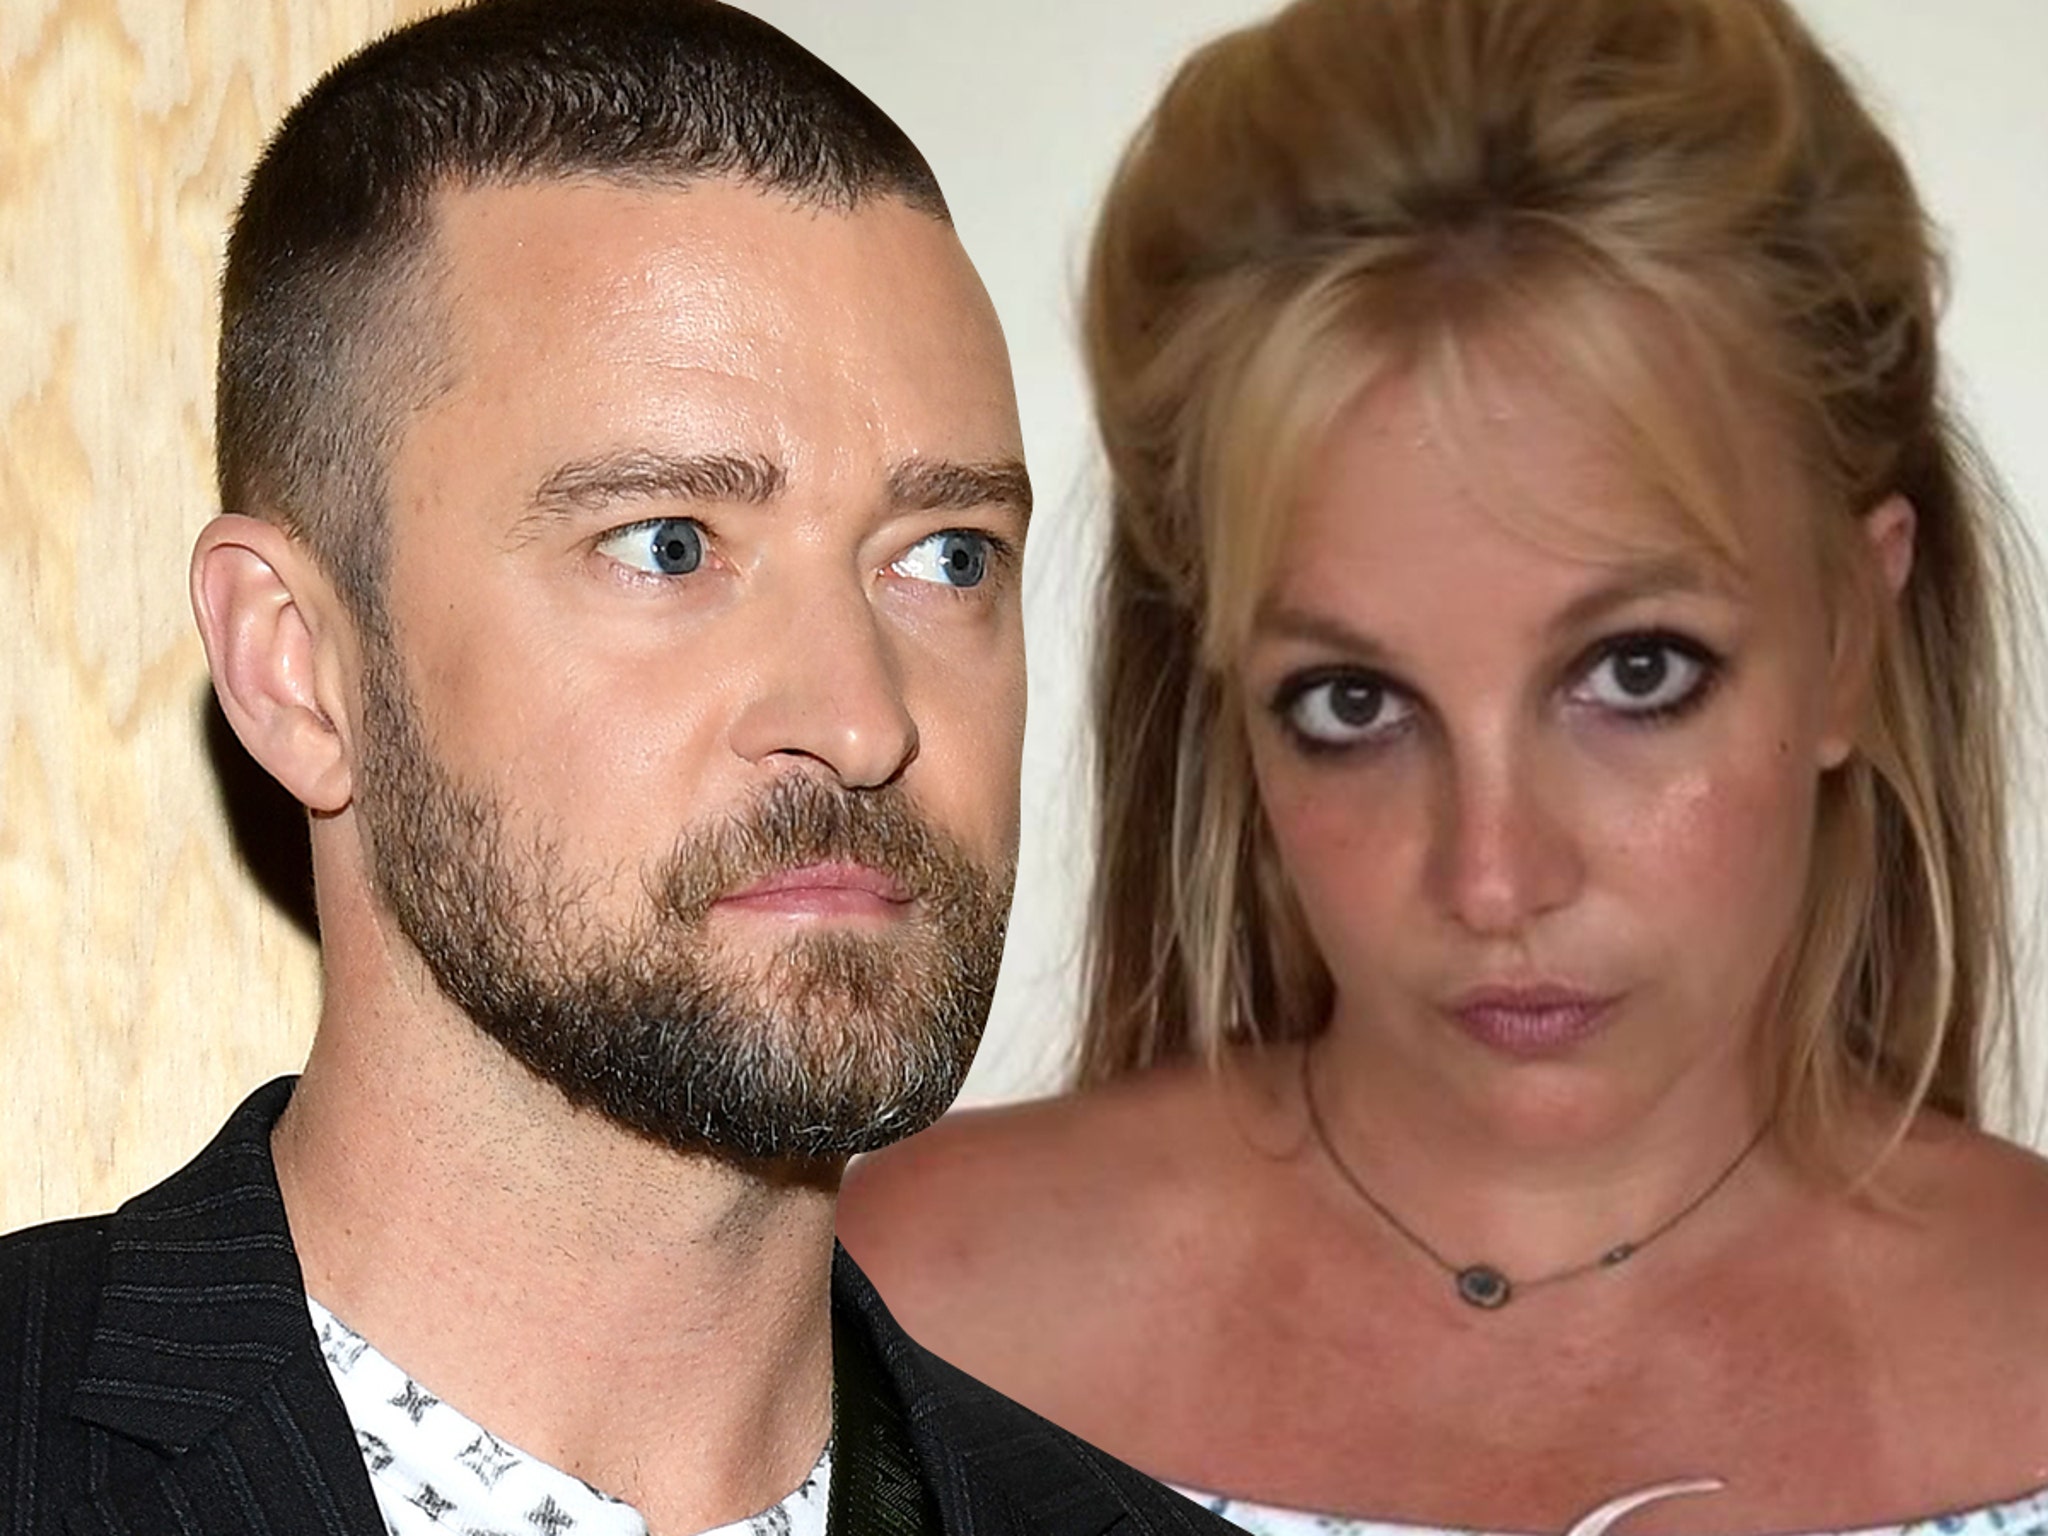 Justin Timberlake Says Let Britney Spears 'Live However She Wants